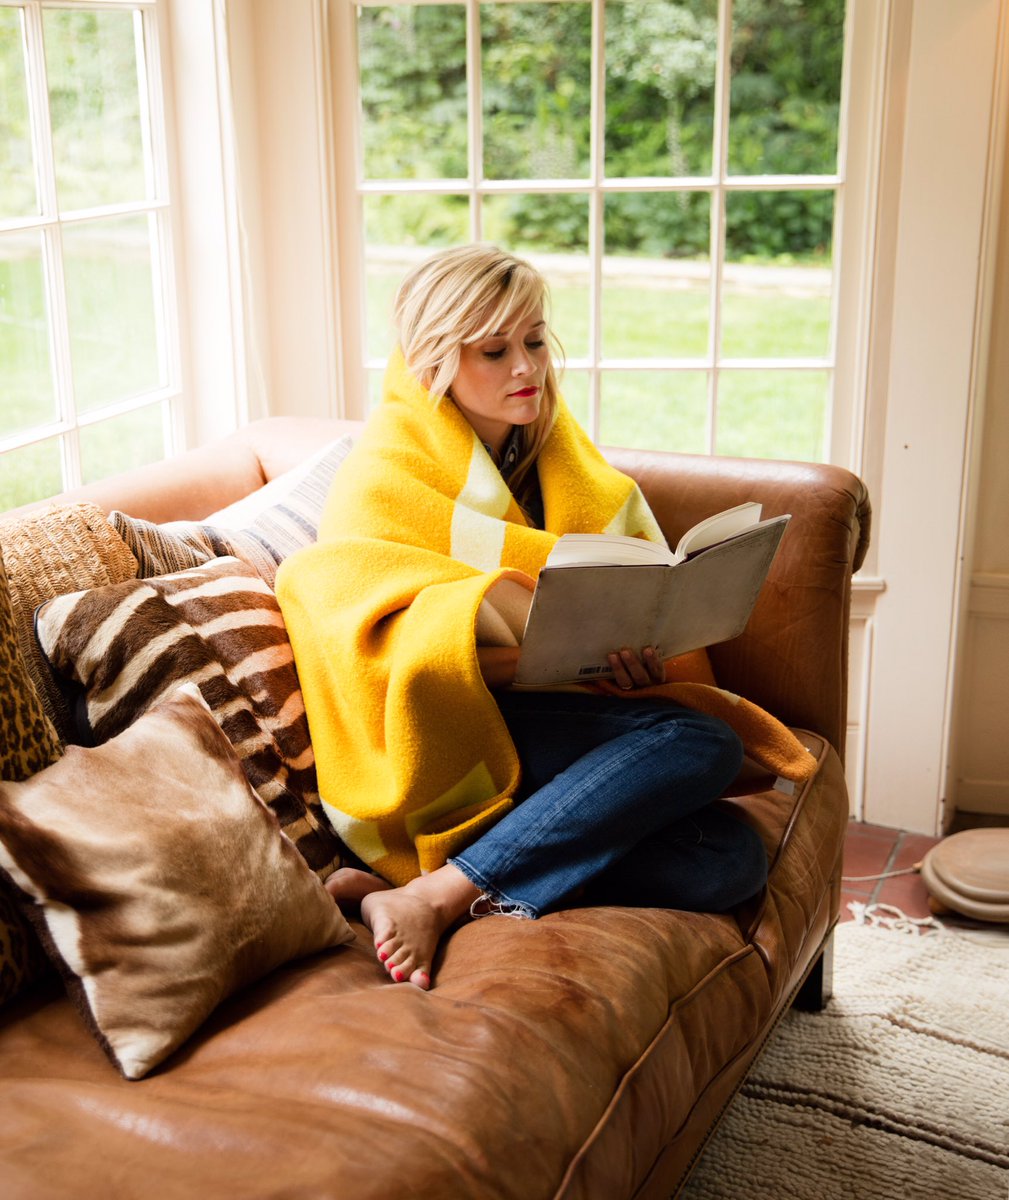 Sundays are for cozying up with a good read. #RWBookClub @RWBookClub https://t.co/BR9nnjXMEV